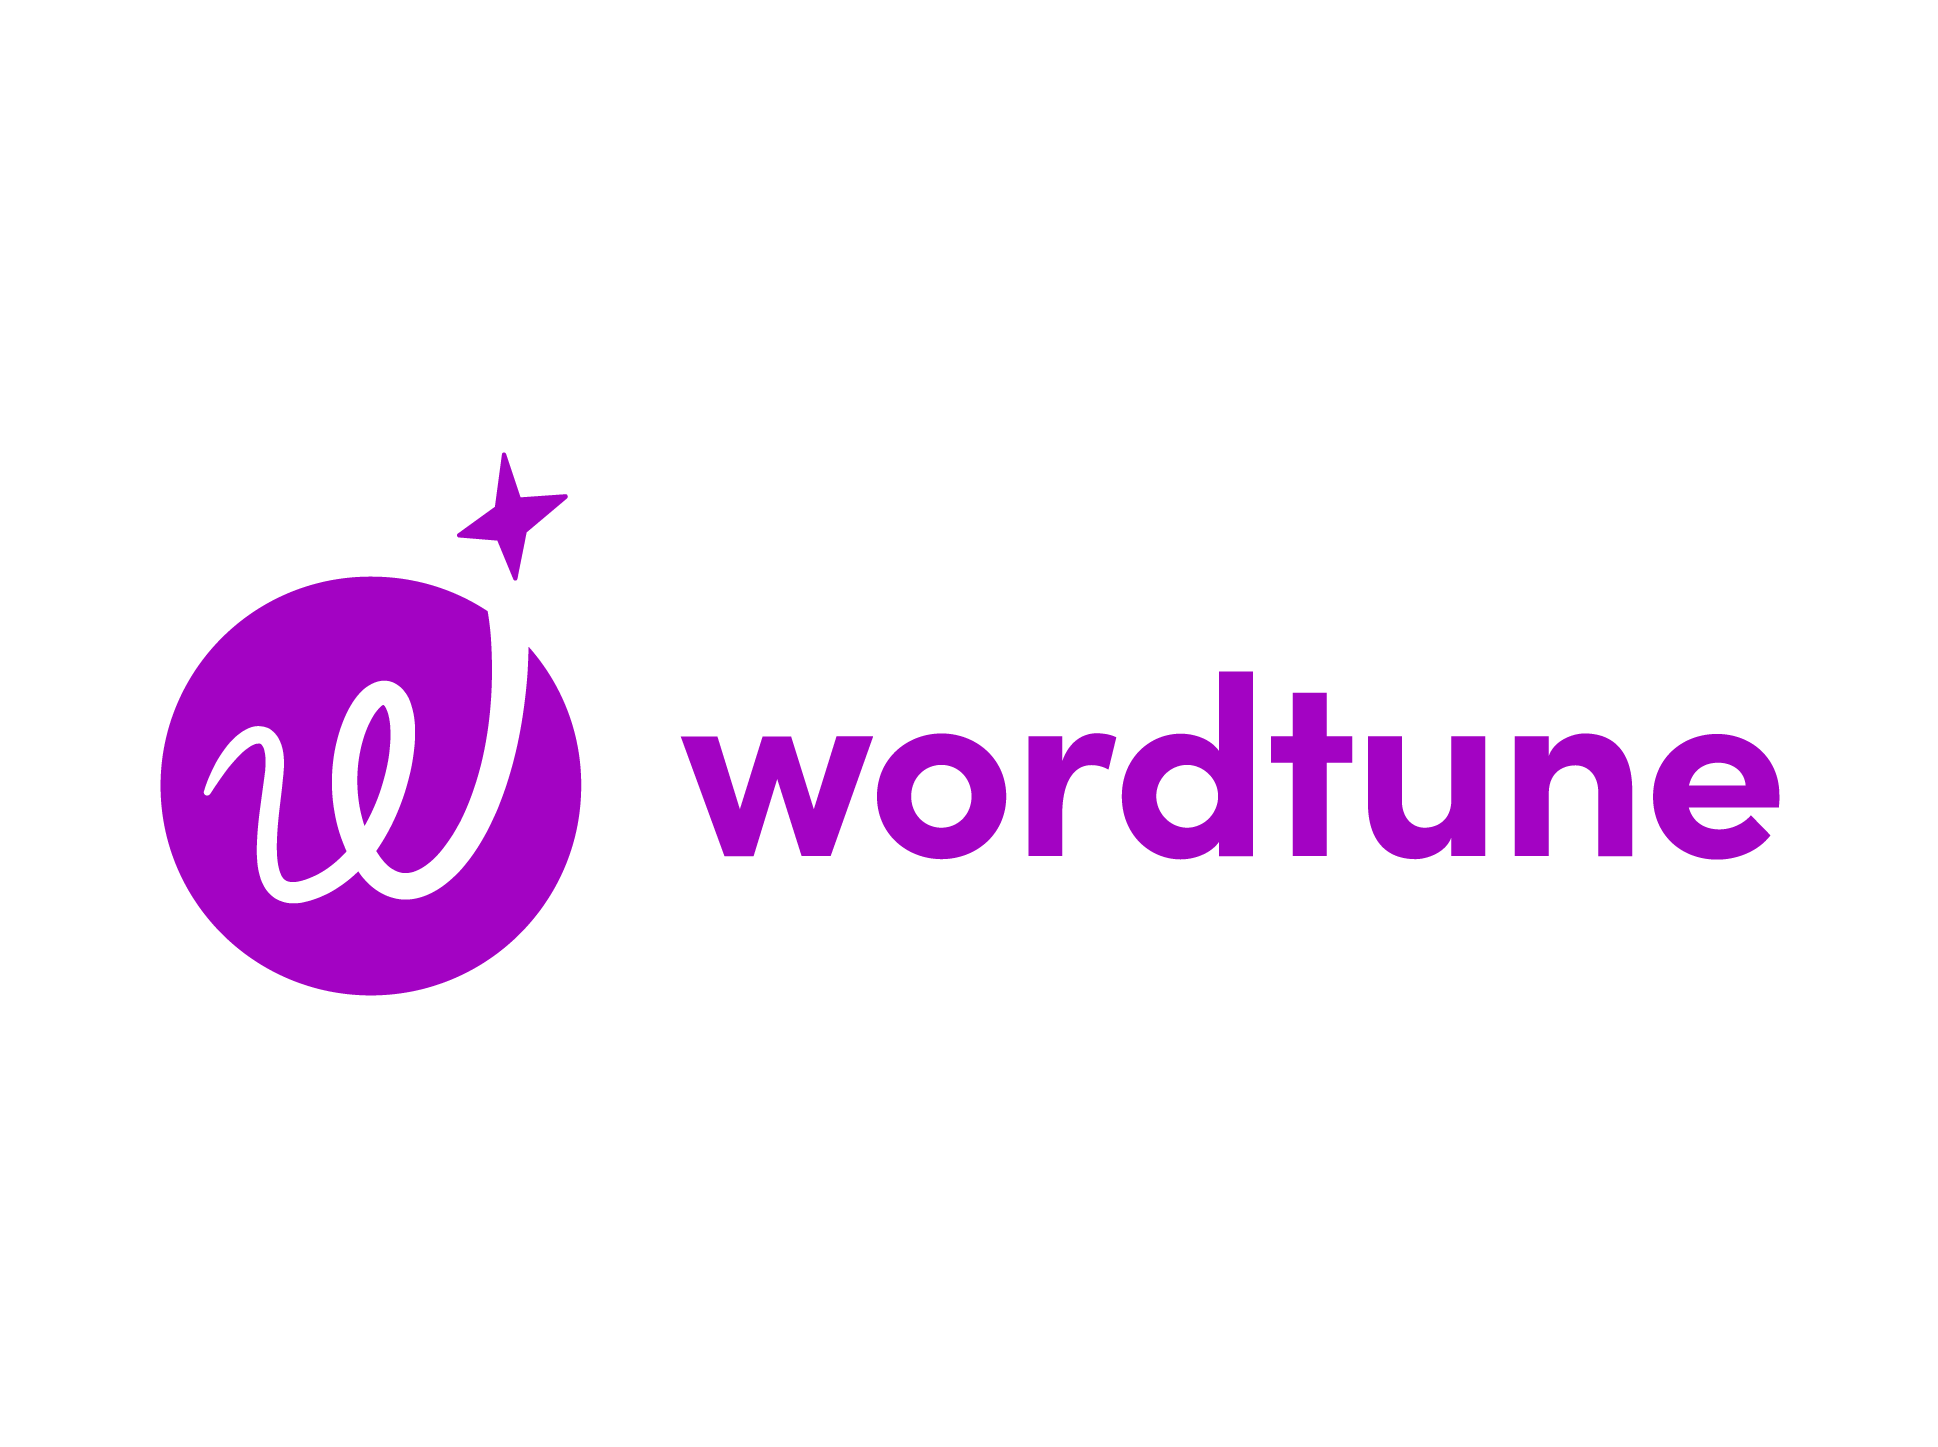 One of the AI text generator tools Wordtune's logo